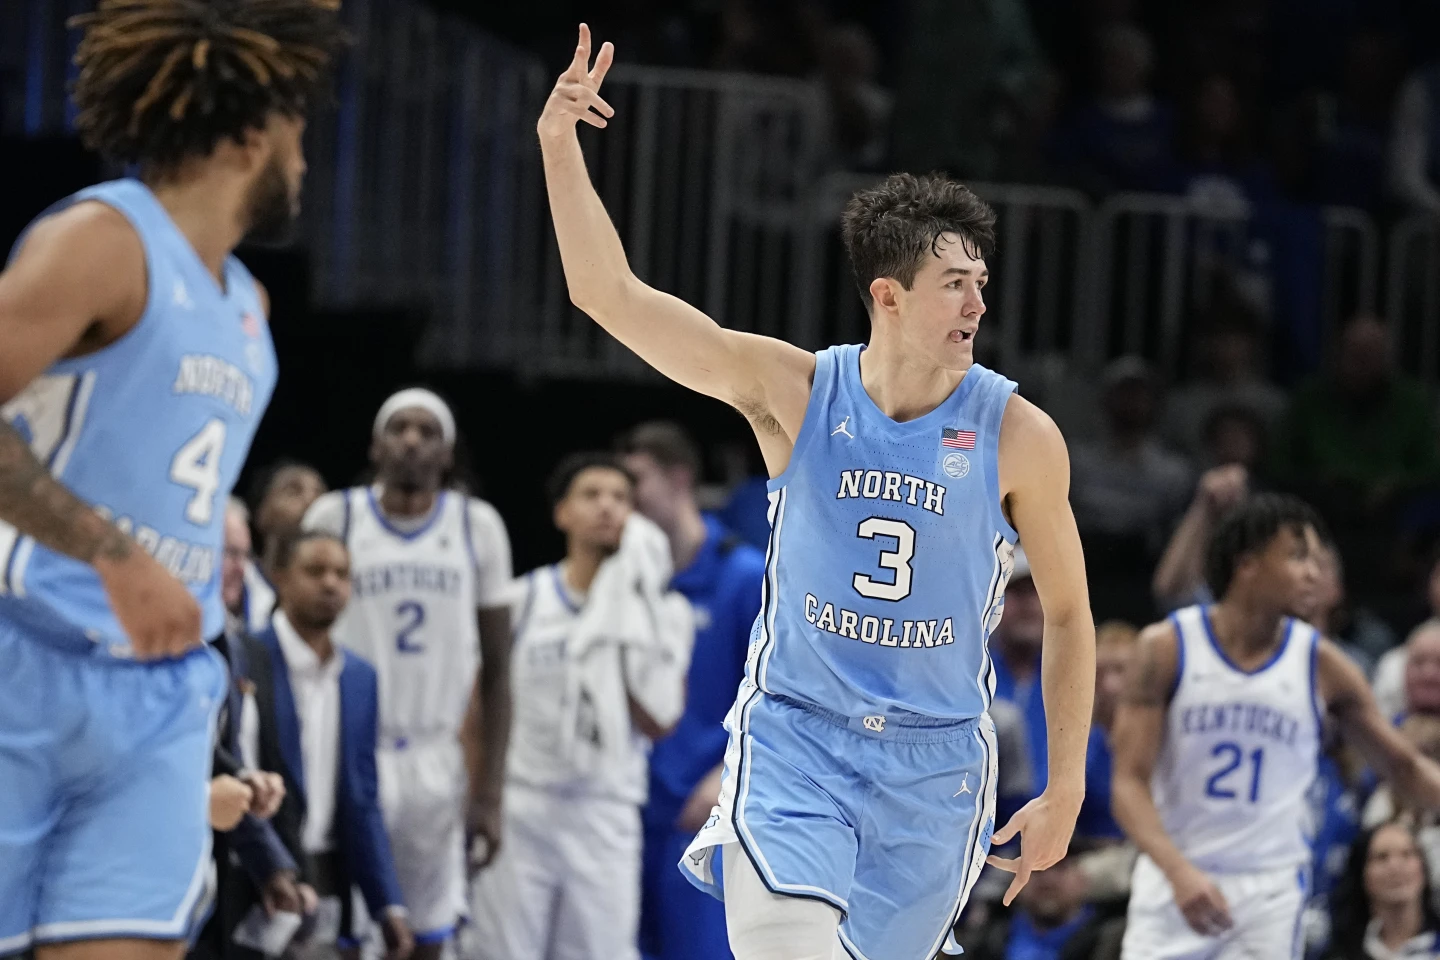 UNC can’t match Kentucky’s physicality or make enough plays at the end